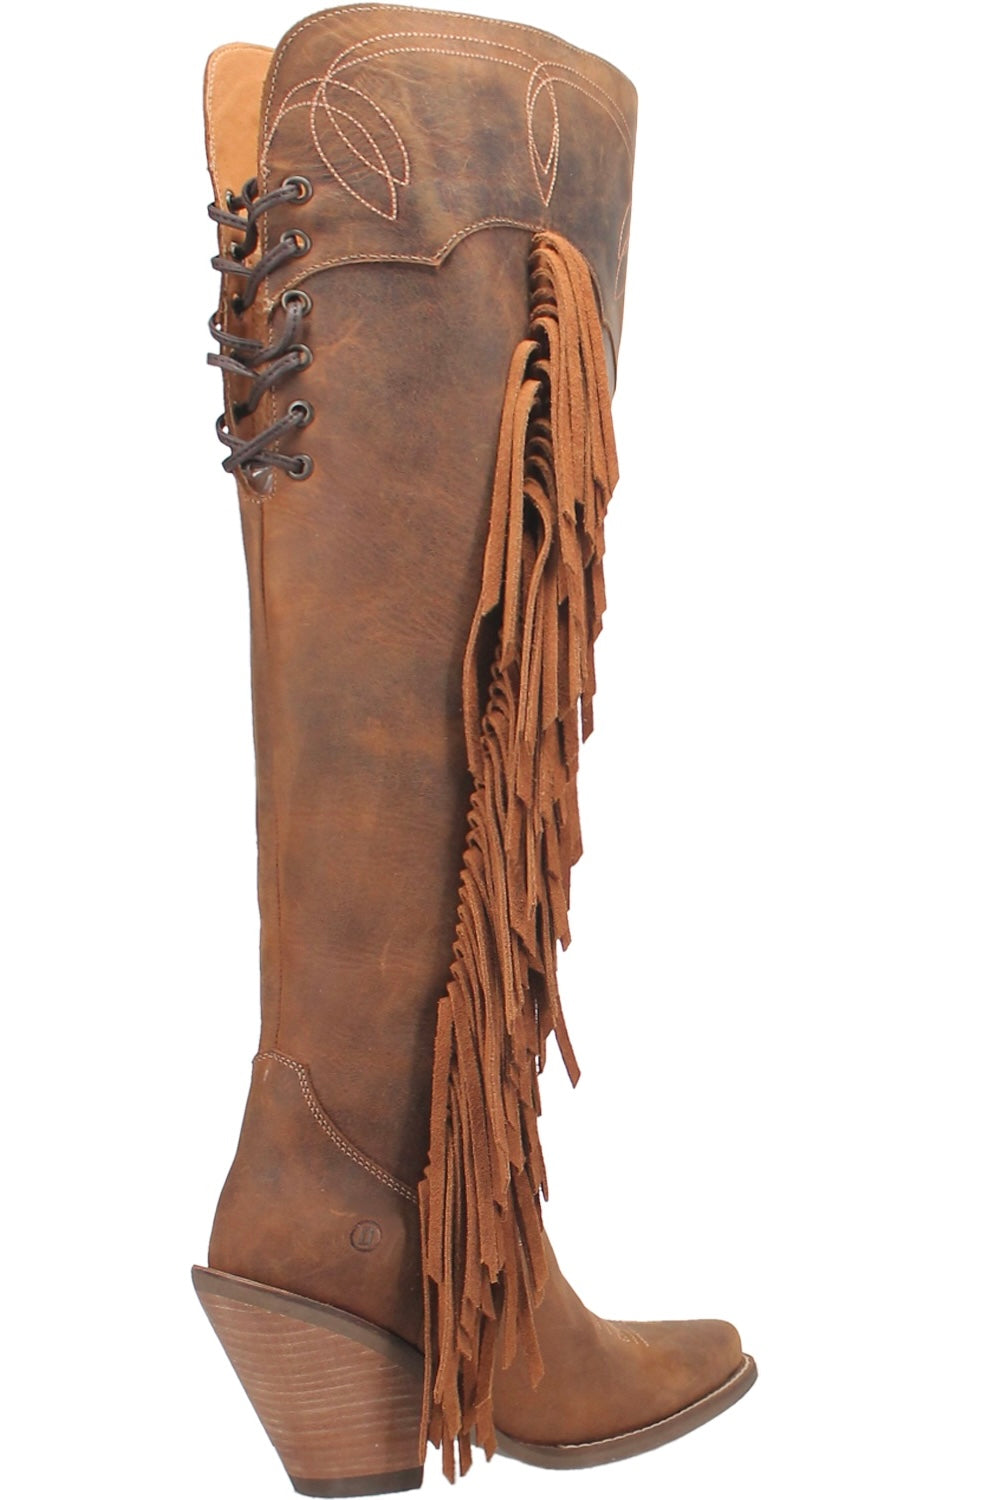 Sky High Leather Boot in Brown